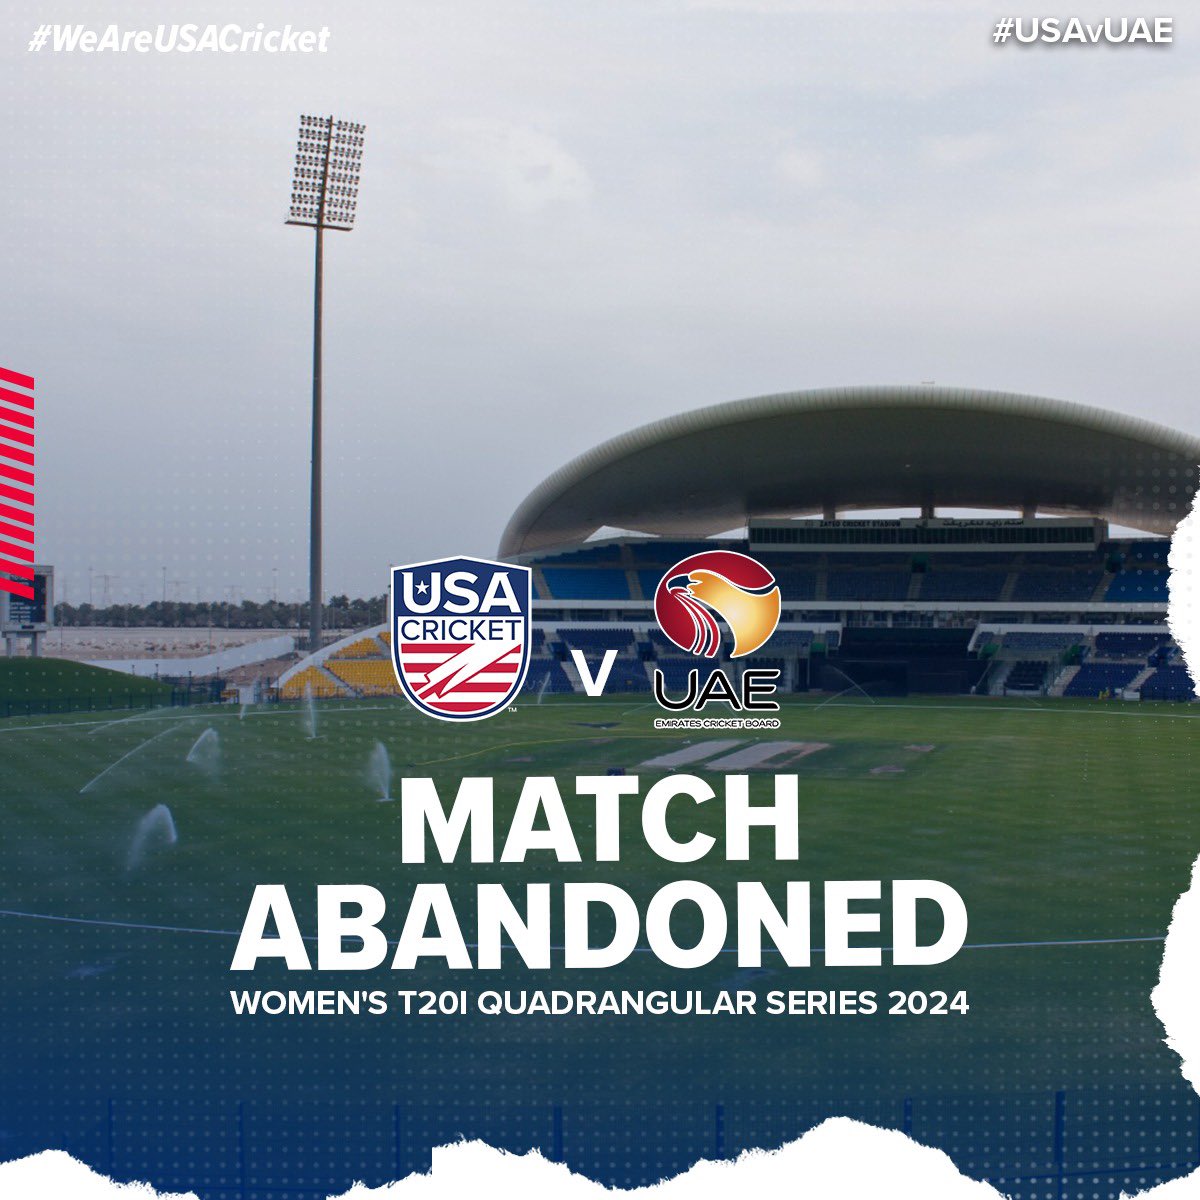 UPDATE 📢:

Due to wet field conditions, today’s T20 match against @EmiratesCricket was cancelled. 

Please stay tuned for more updates on upcoming matches.

#WeAreUSACricket